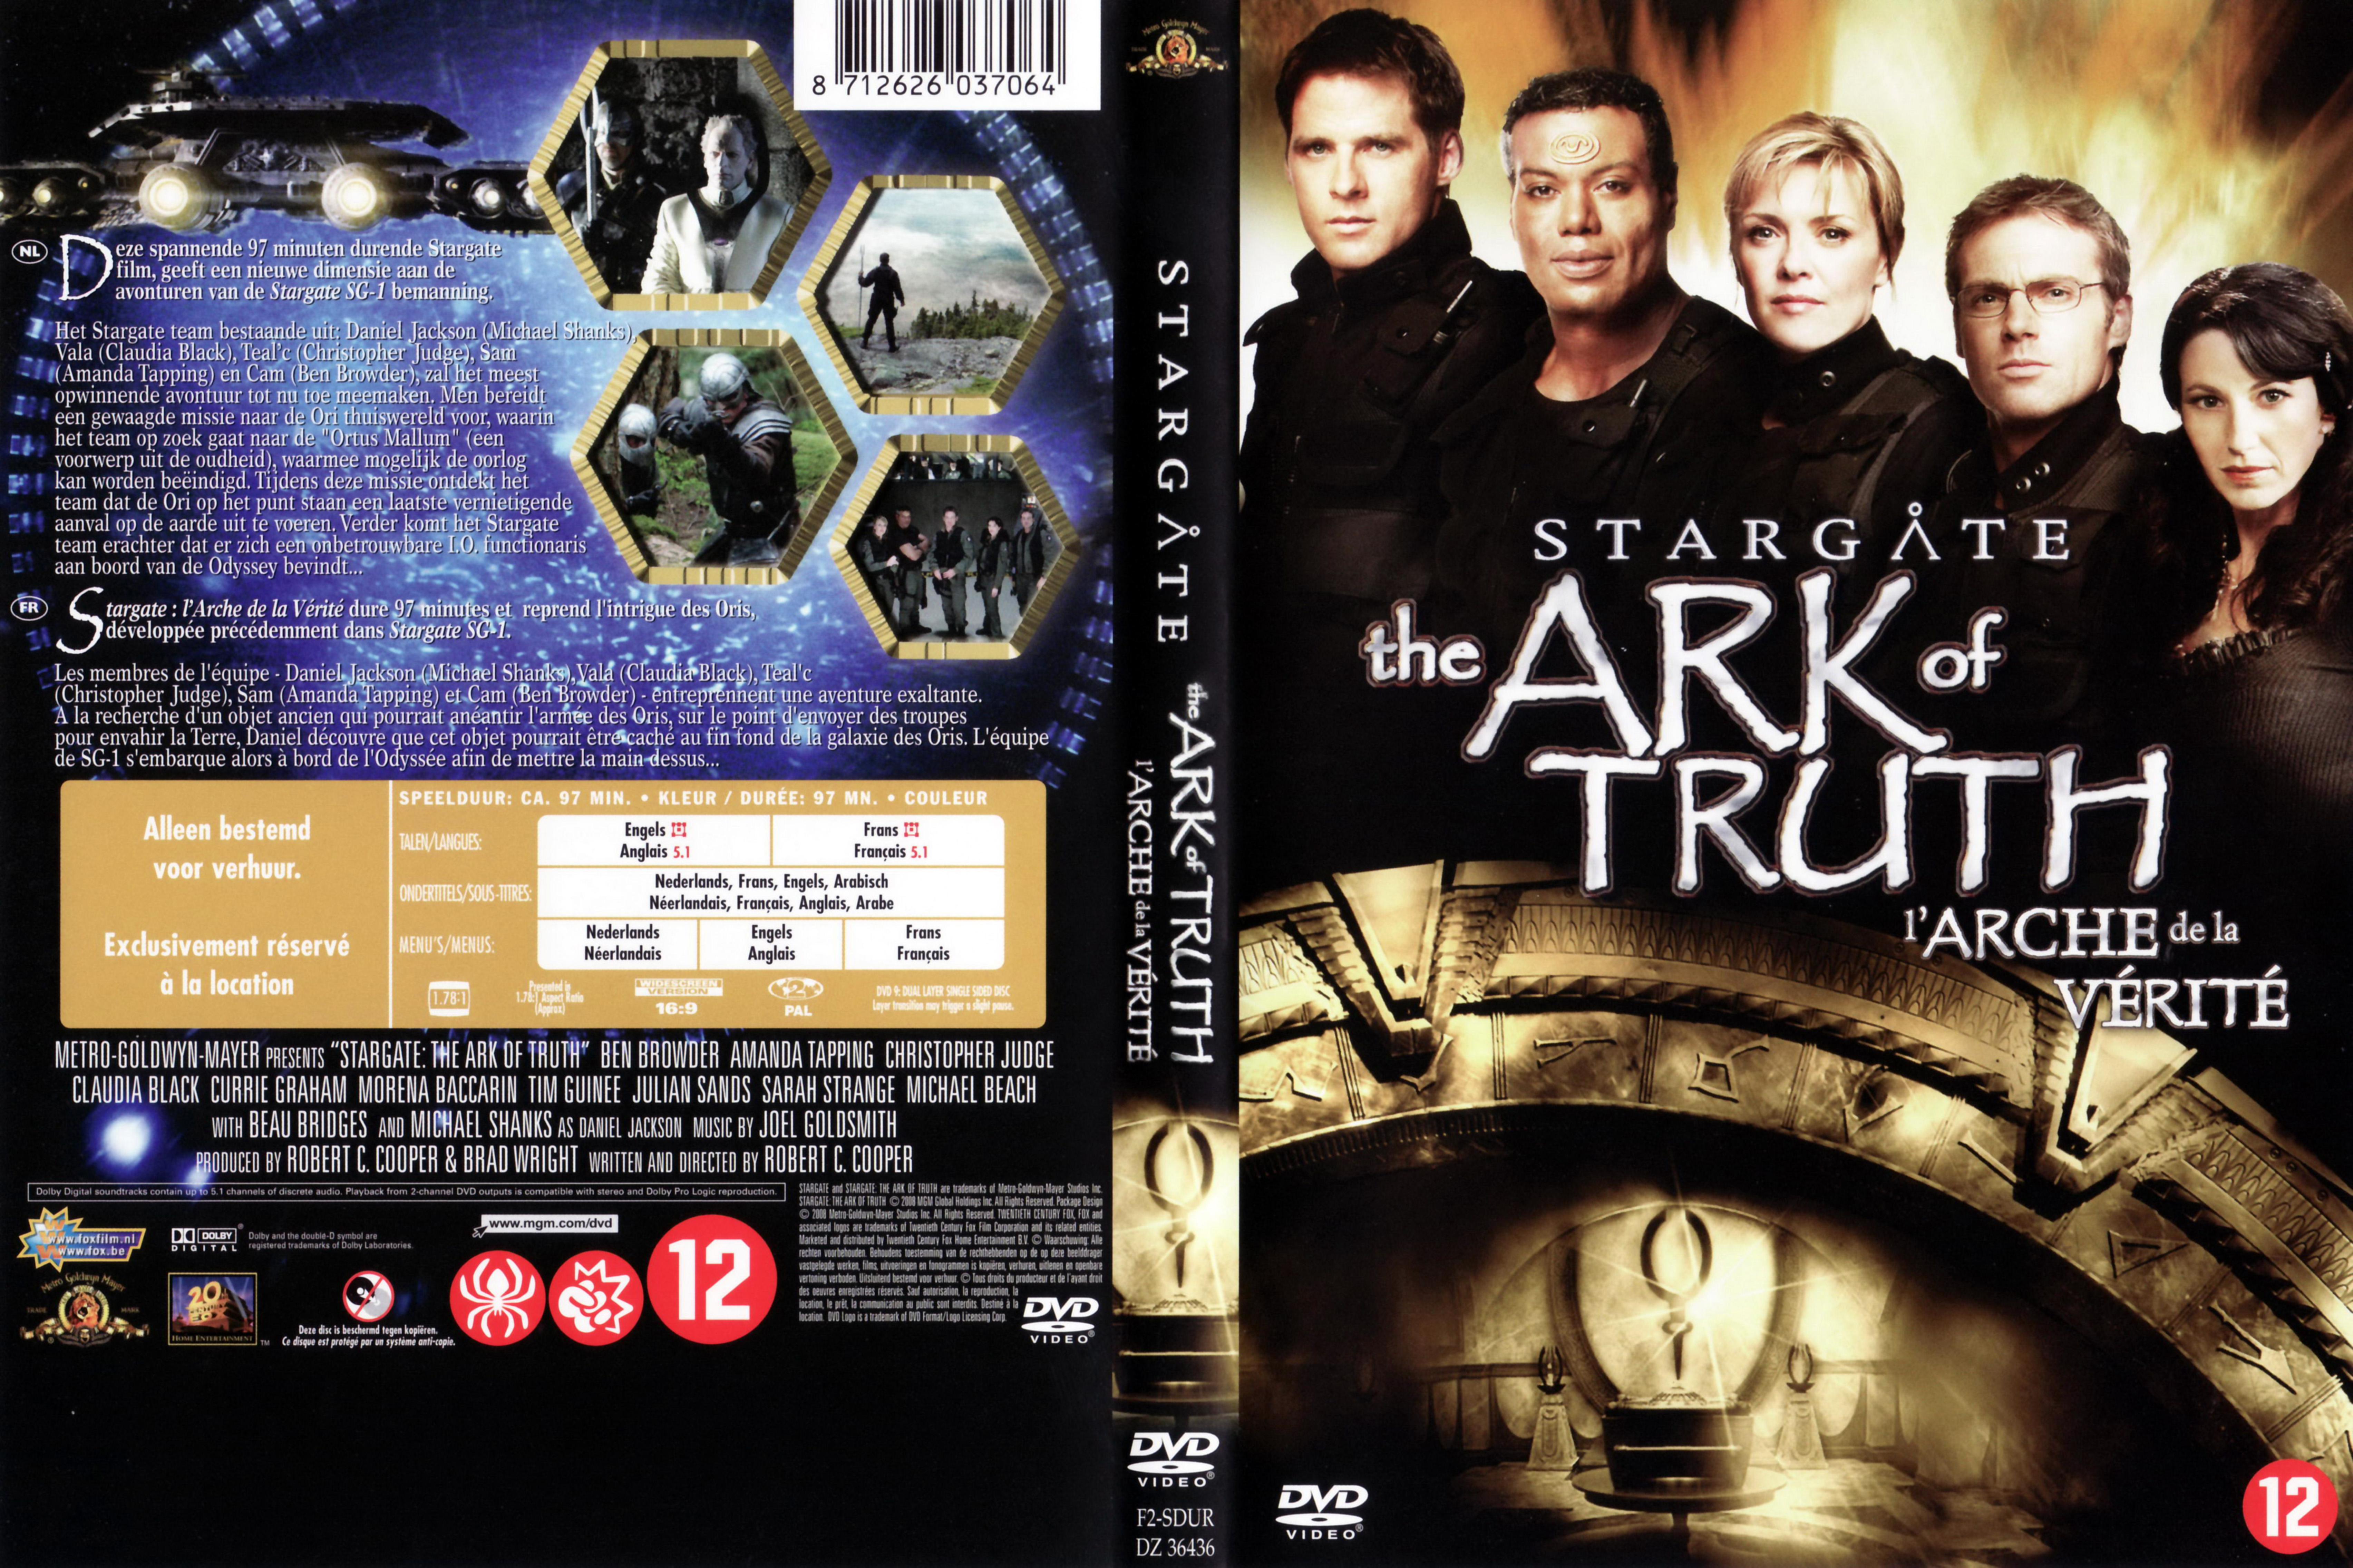 Jaquette DVD Stargate The ark of truth - L